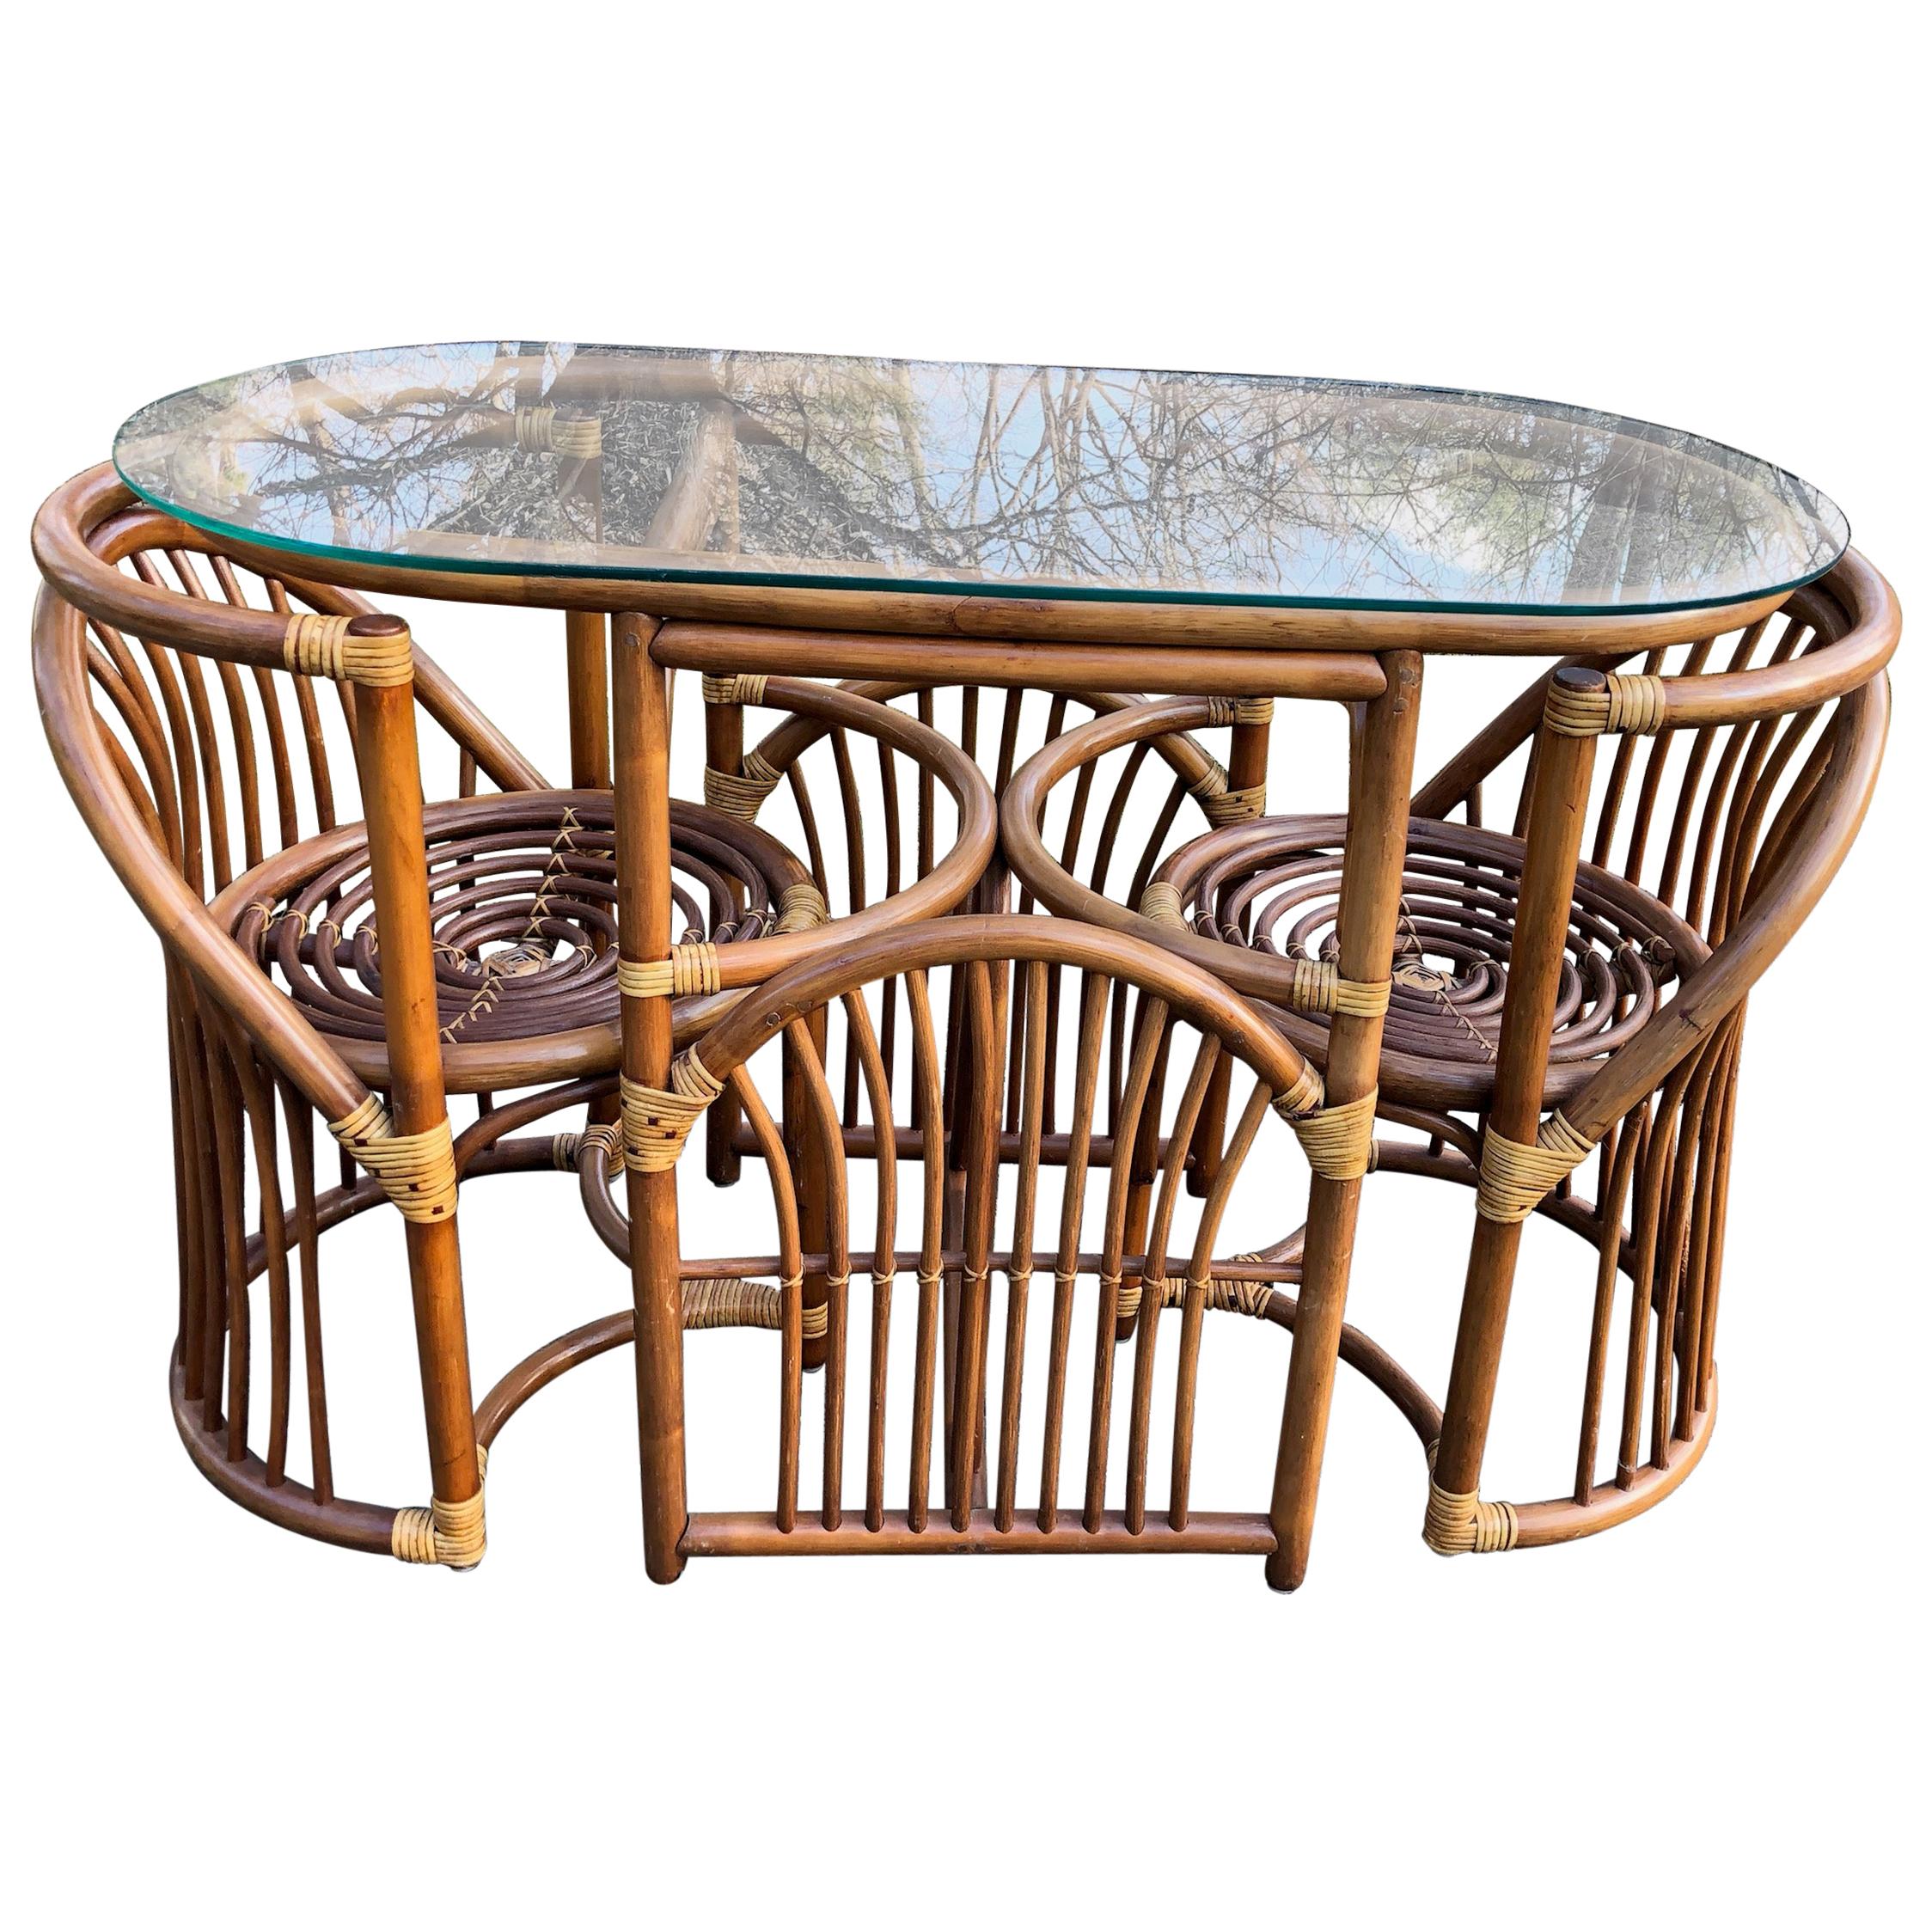 Cool Mid-Century Modern Bentwood and Rattan Dining Set